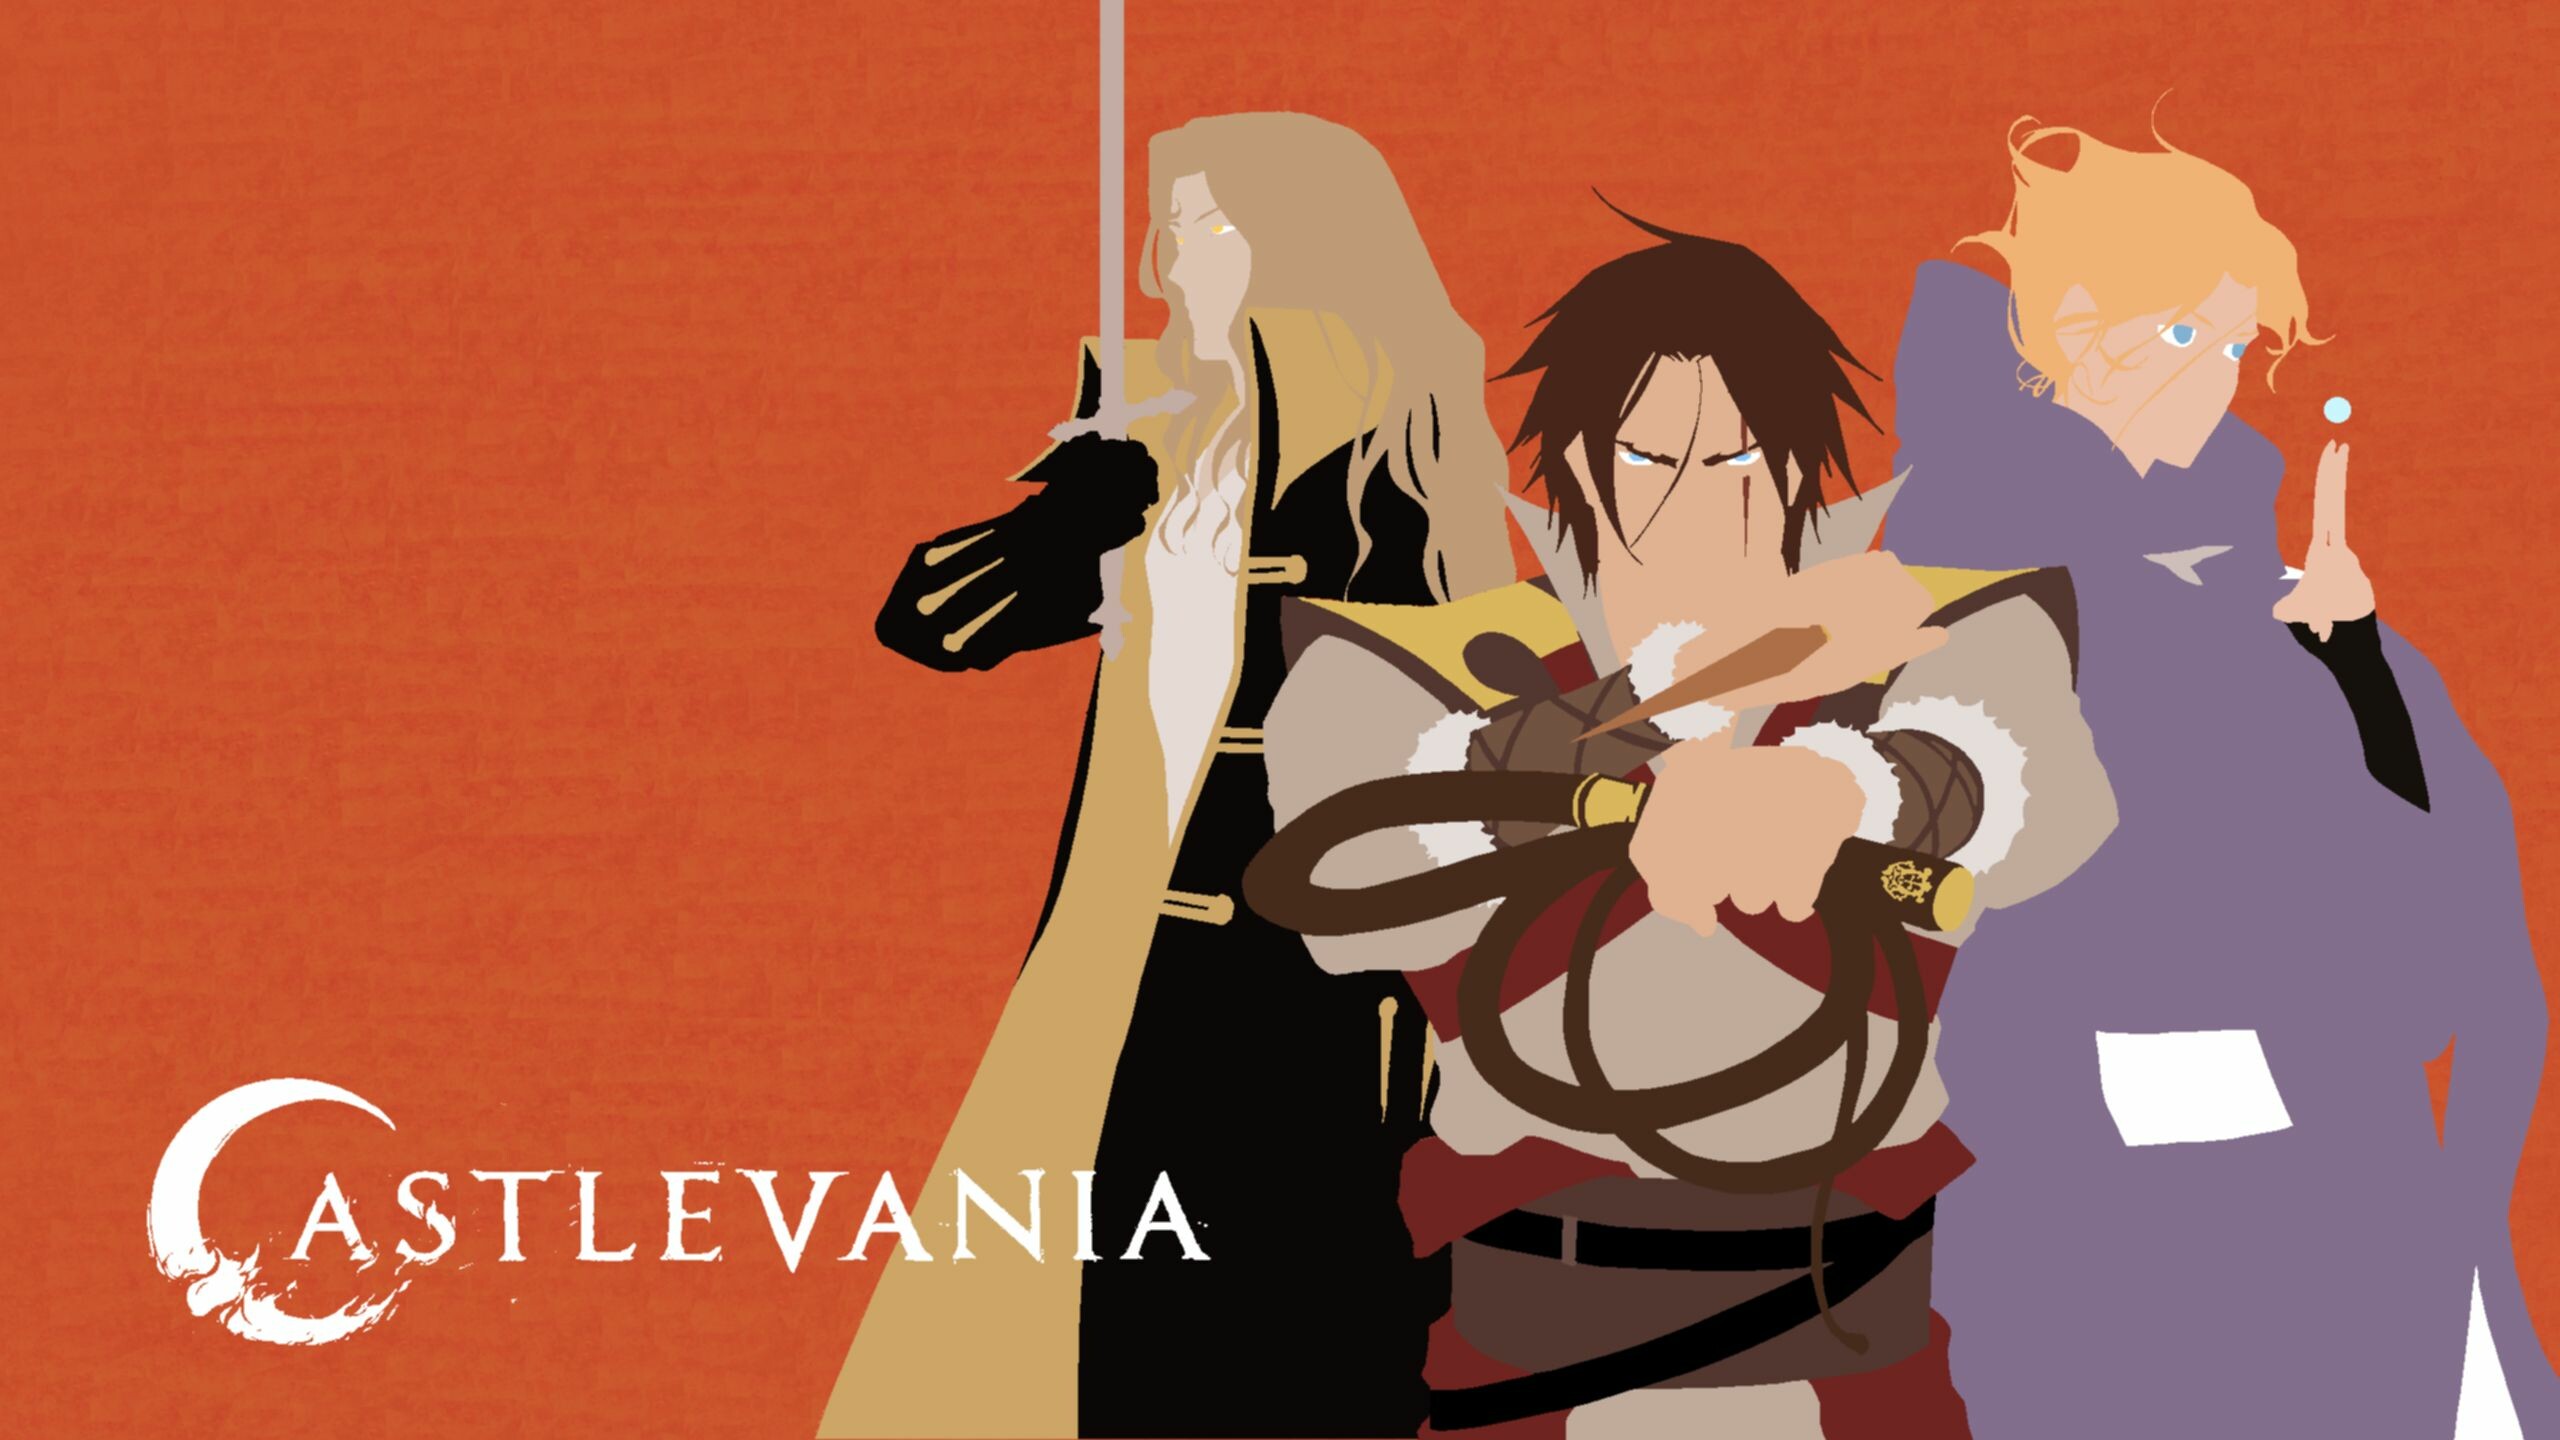 Castlevania (Netflix): Trevor Belmont, Alucard and Sypha Belnades, defending the nation of Wallachia from Dracula and his minions. 2560x1440 HD Wallpaper.